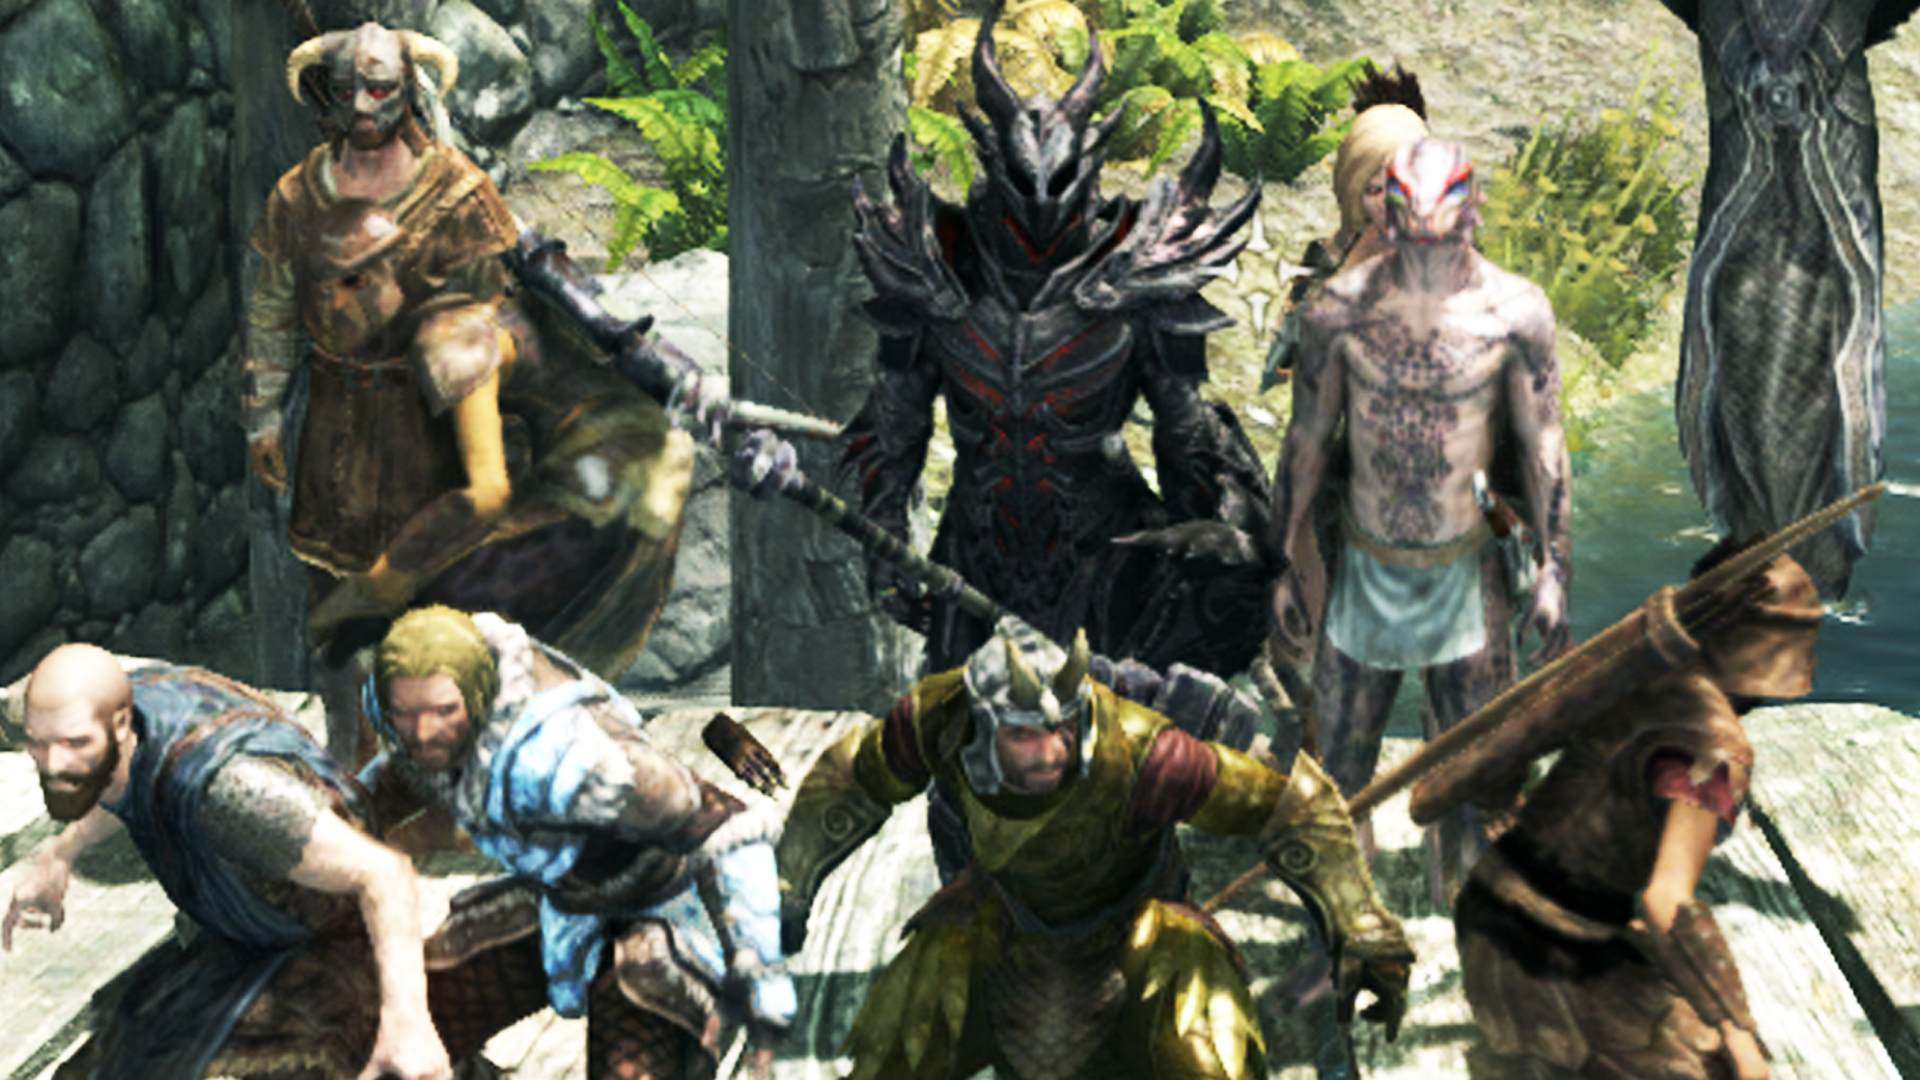 Skyrim multiplayer mod gets nearly 40k downloads in 24 hours